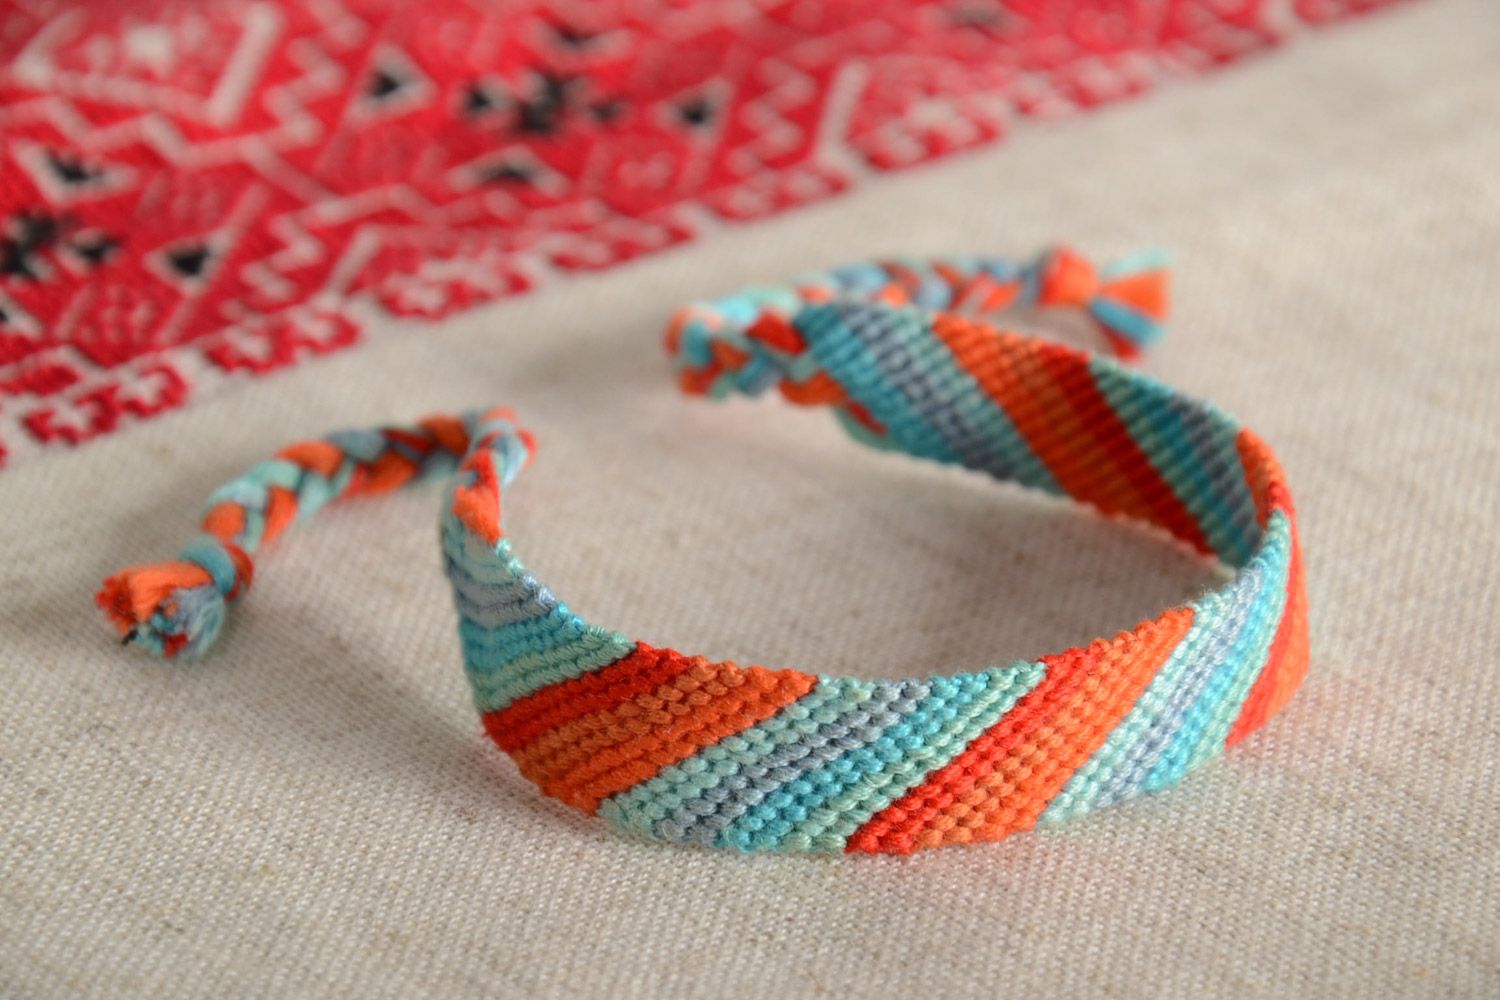 Handmade striped friendship bracelet woven of orange and blue embroidery floss photo 1